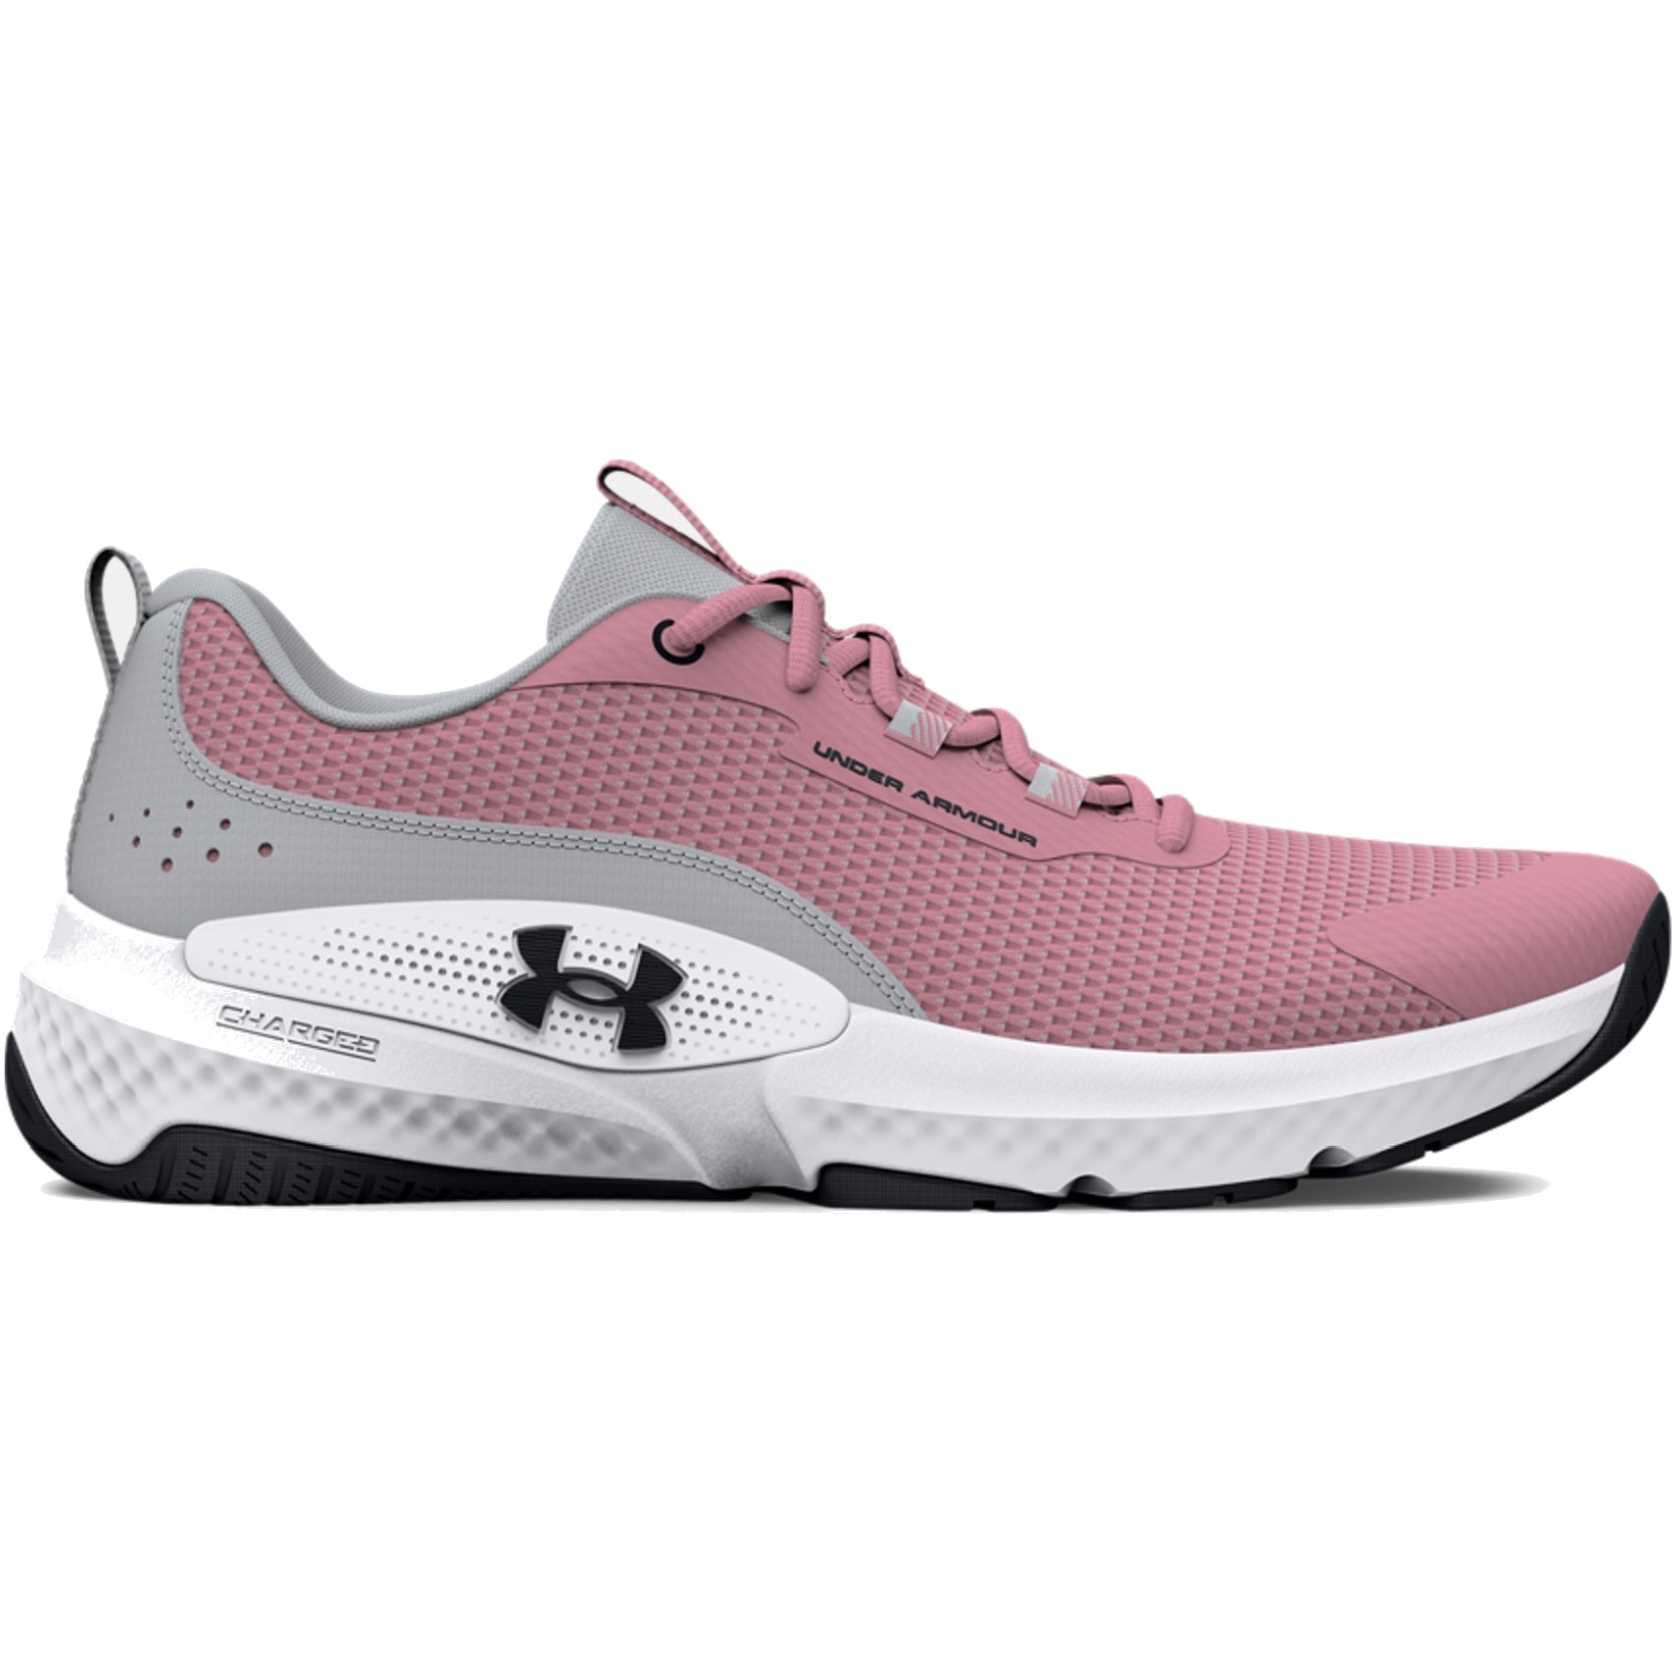 Under Armour UA Pure Stretch Thong Women 3-Pack - Pink Elixir/Halo  Gray/Rebel Pink